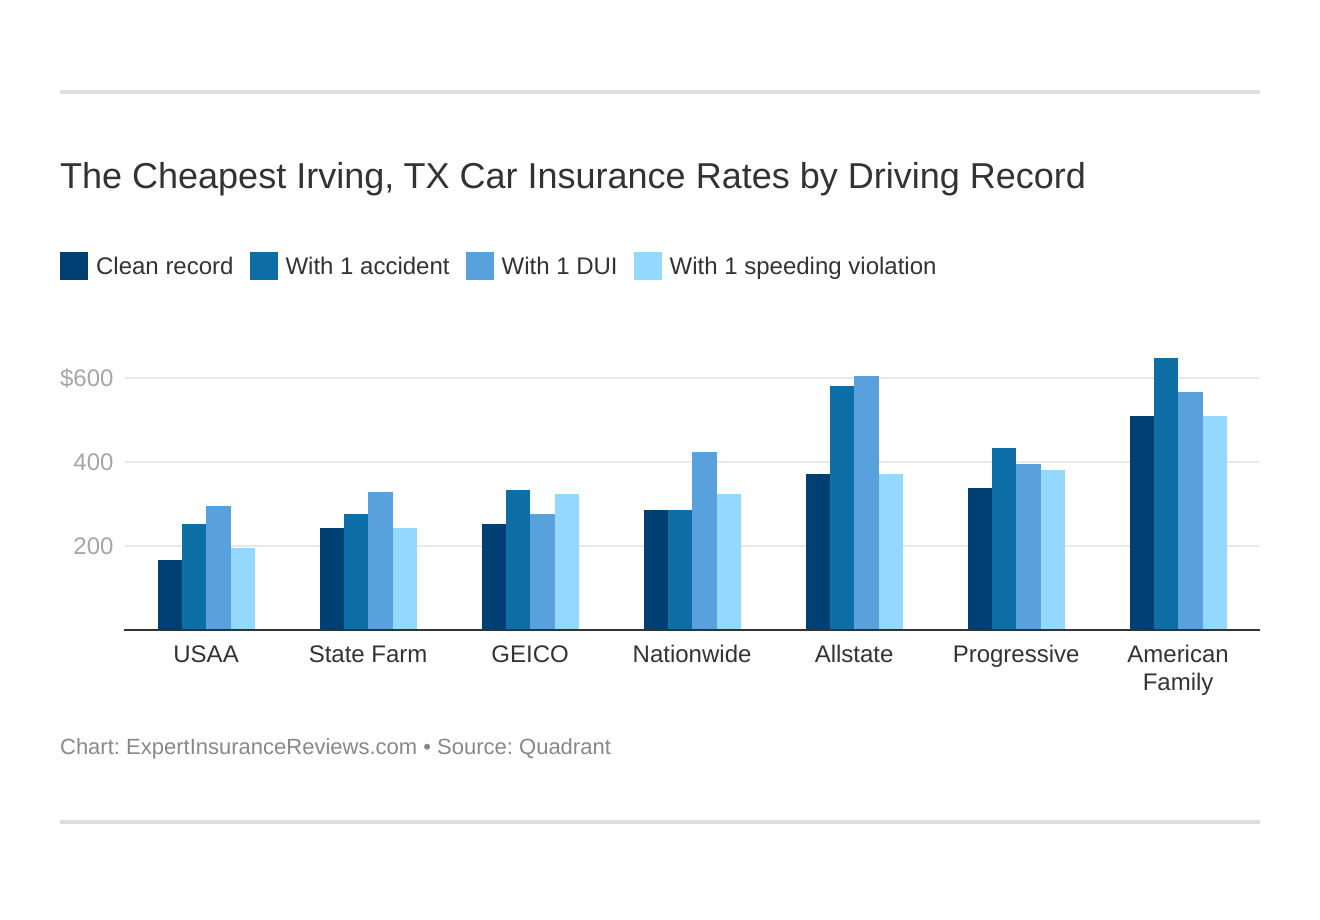 The Cheapest Irving, TX Car Insurance Rates by Driving Record